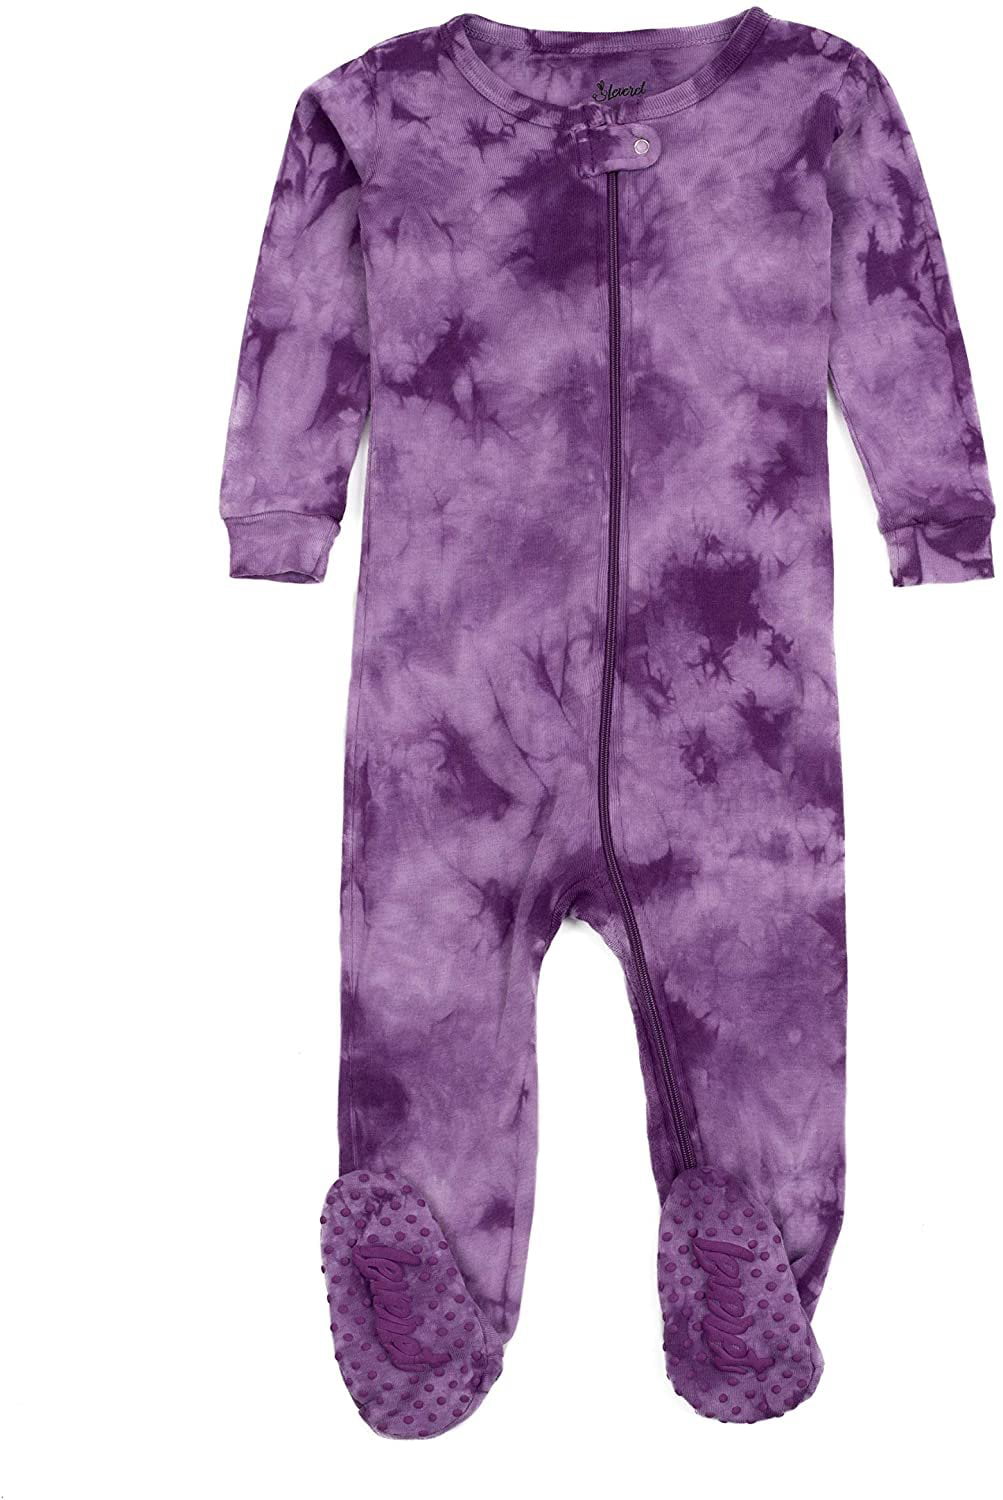 Leveret Kids & Toddler Footed Pajamas Boys Girls 100% Cotton Tie Dye Size 3 Months-5 Years